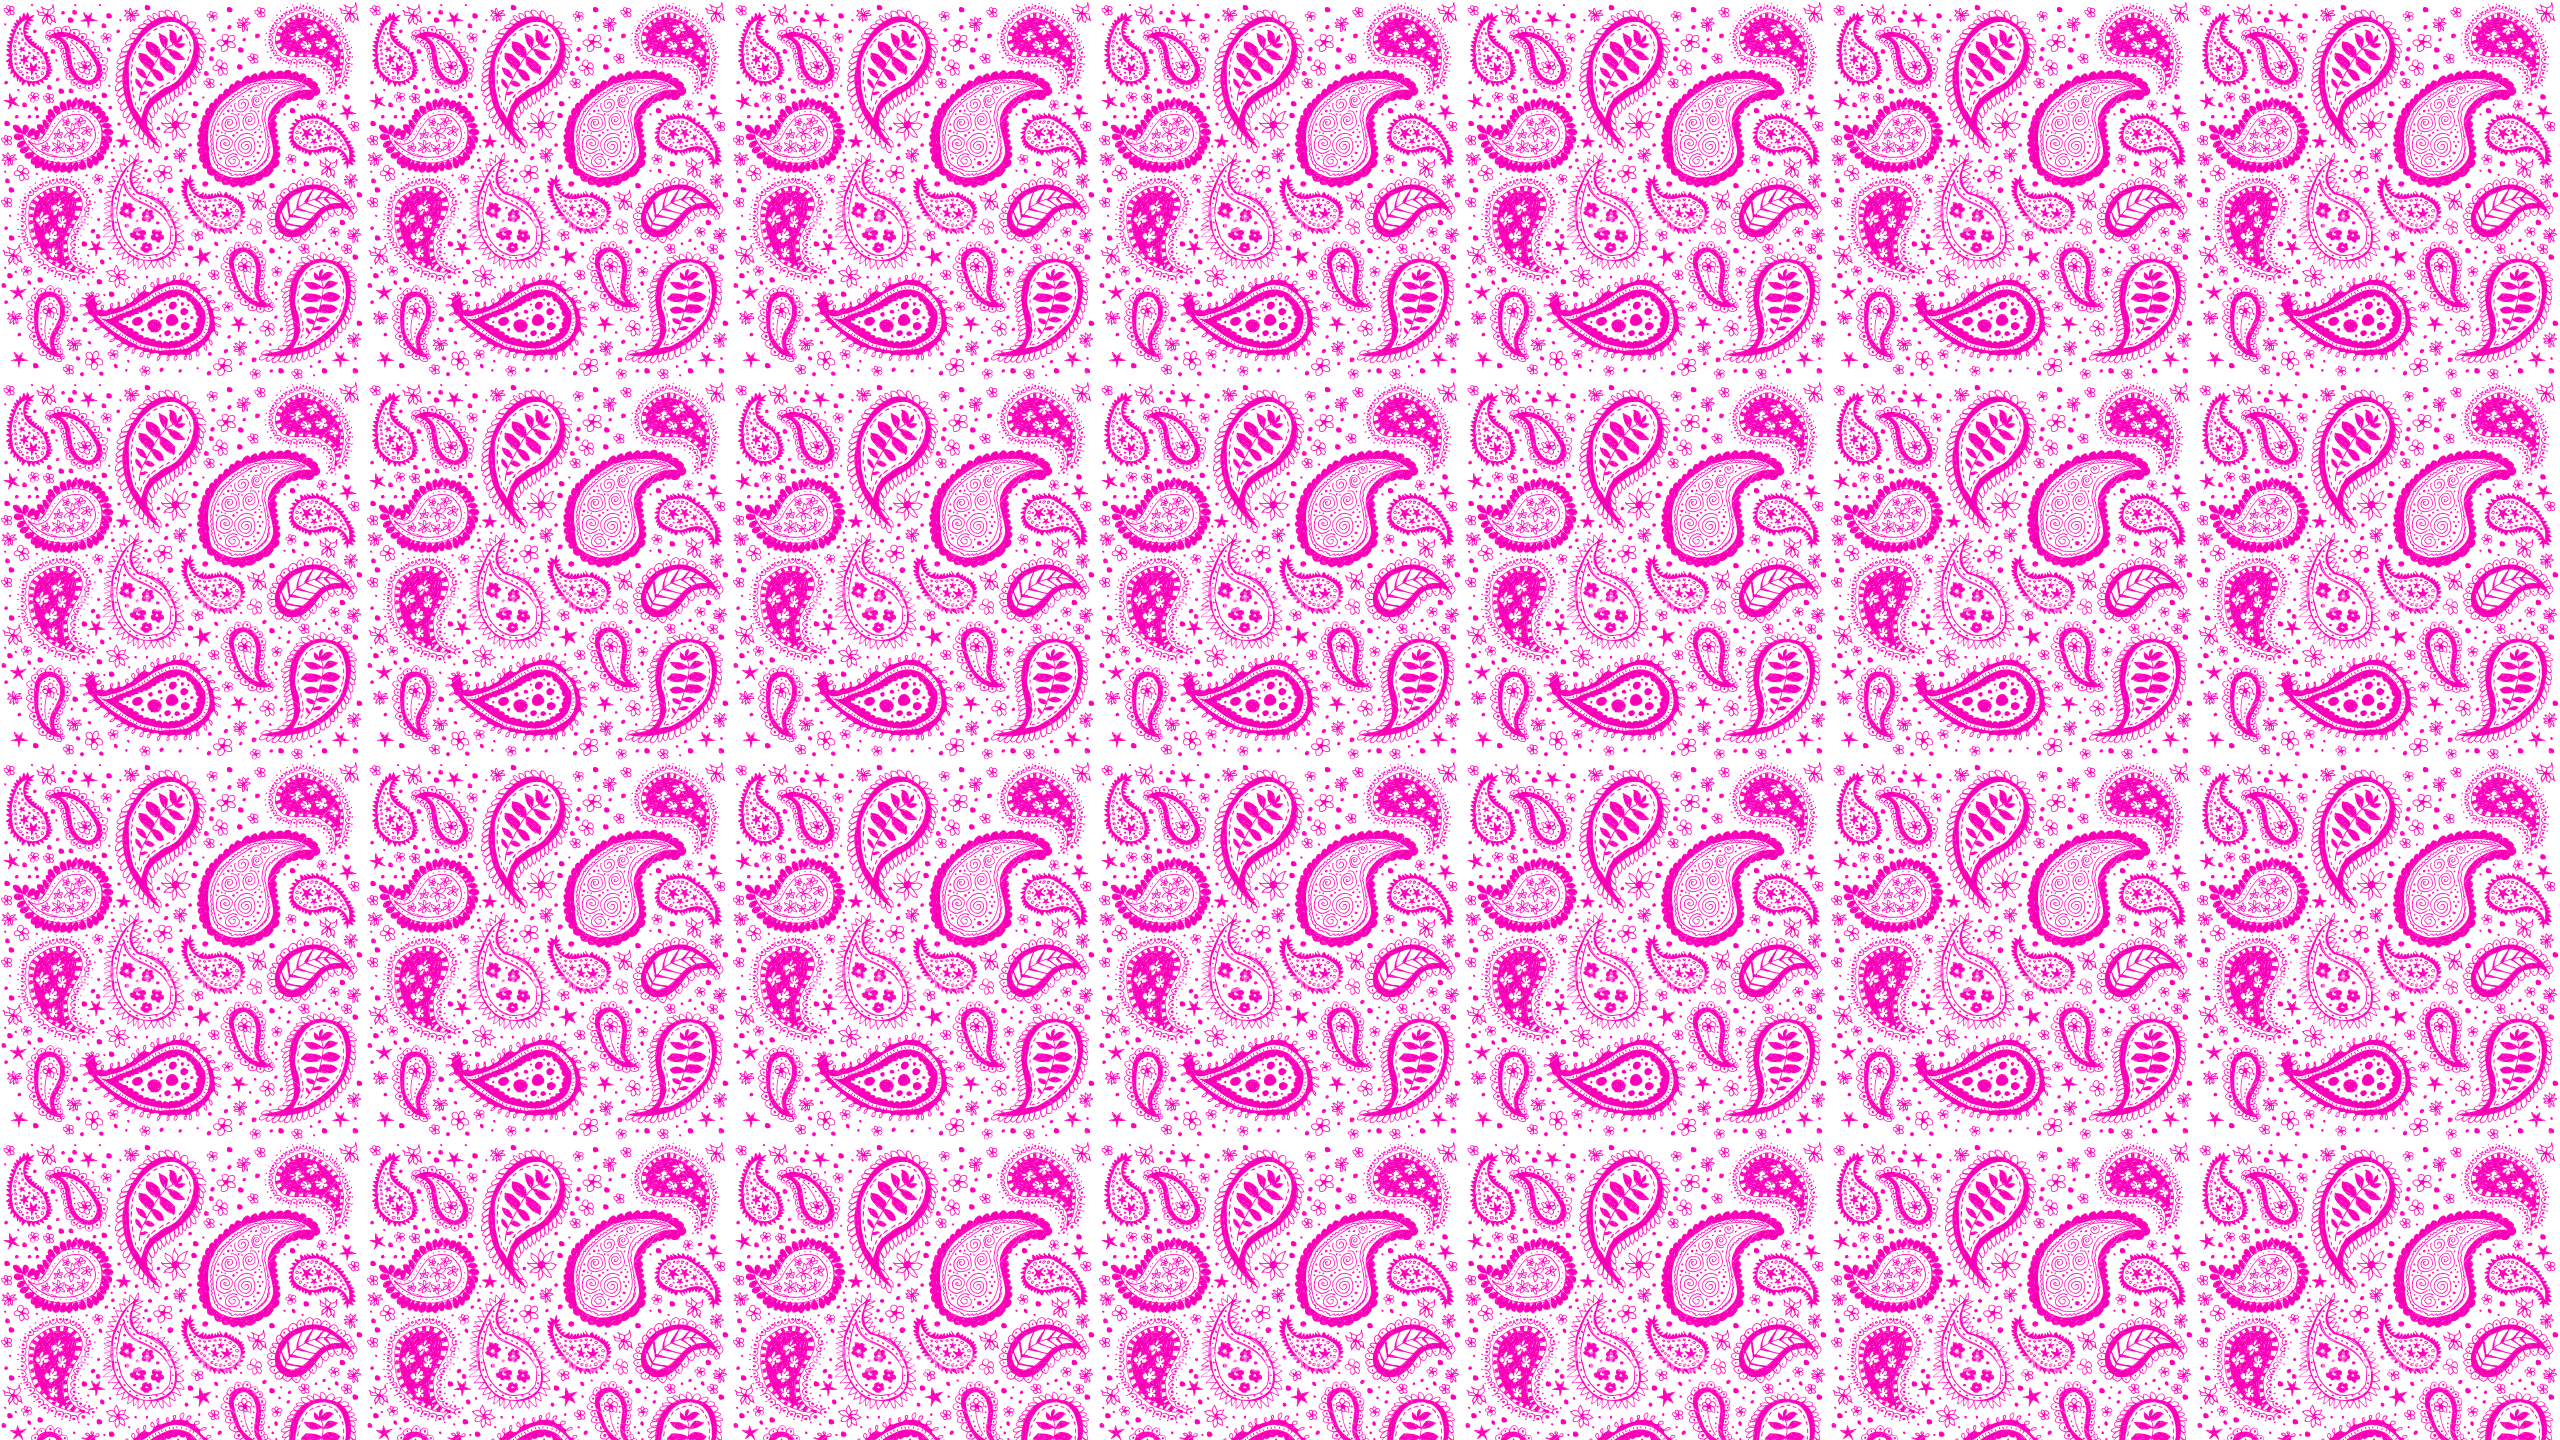 This Pink Paisley Desktop Wallpaper Is Easy Just Save The